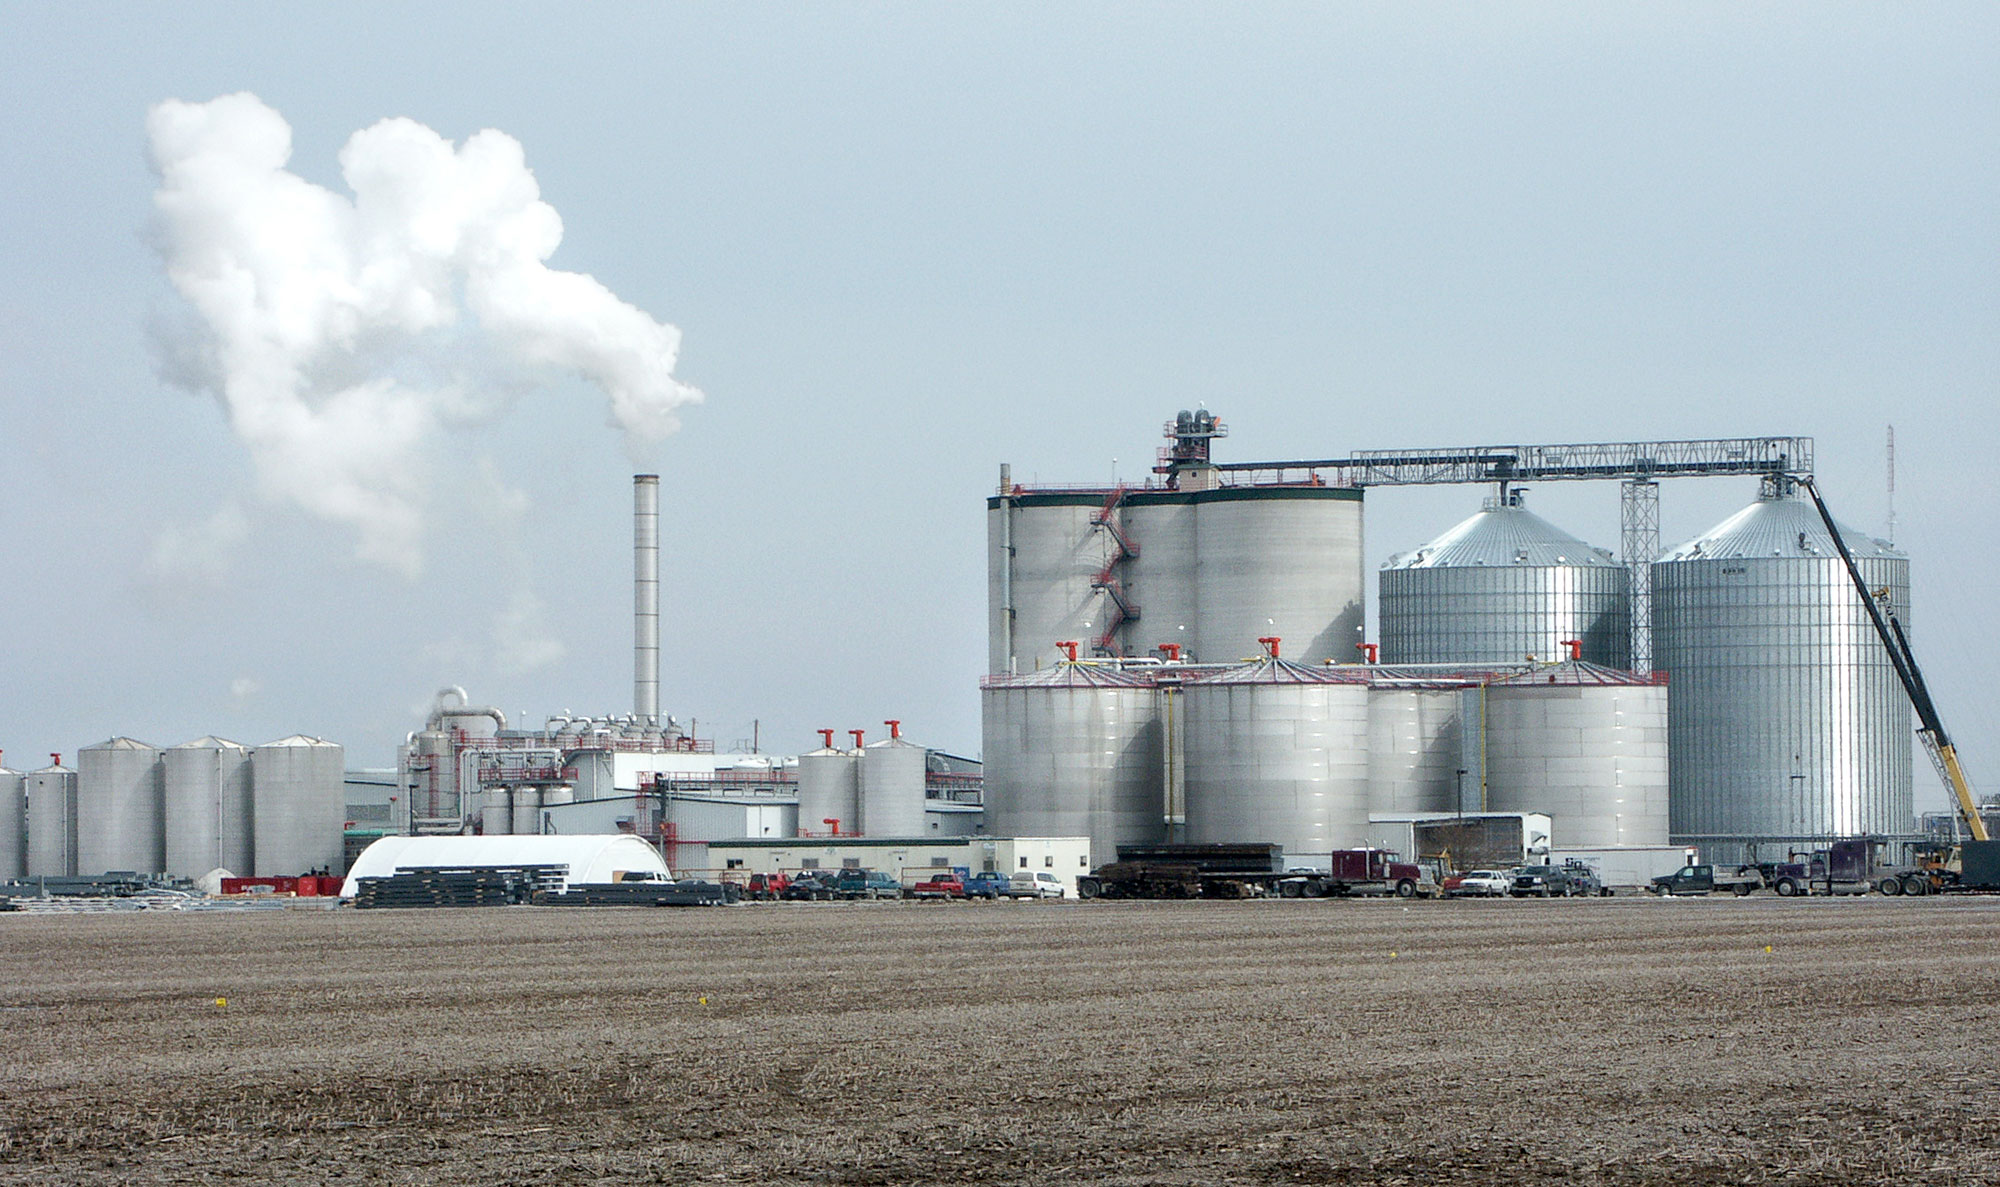 Photograph of a bioethanol plant standing in a barren field. The plant consists of a cluster of cylindrical towers and low buildings. White smoke or steam rises from a thin smokestack at the plant.